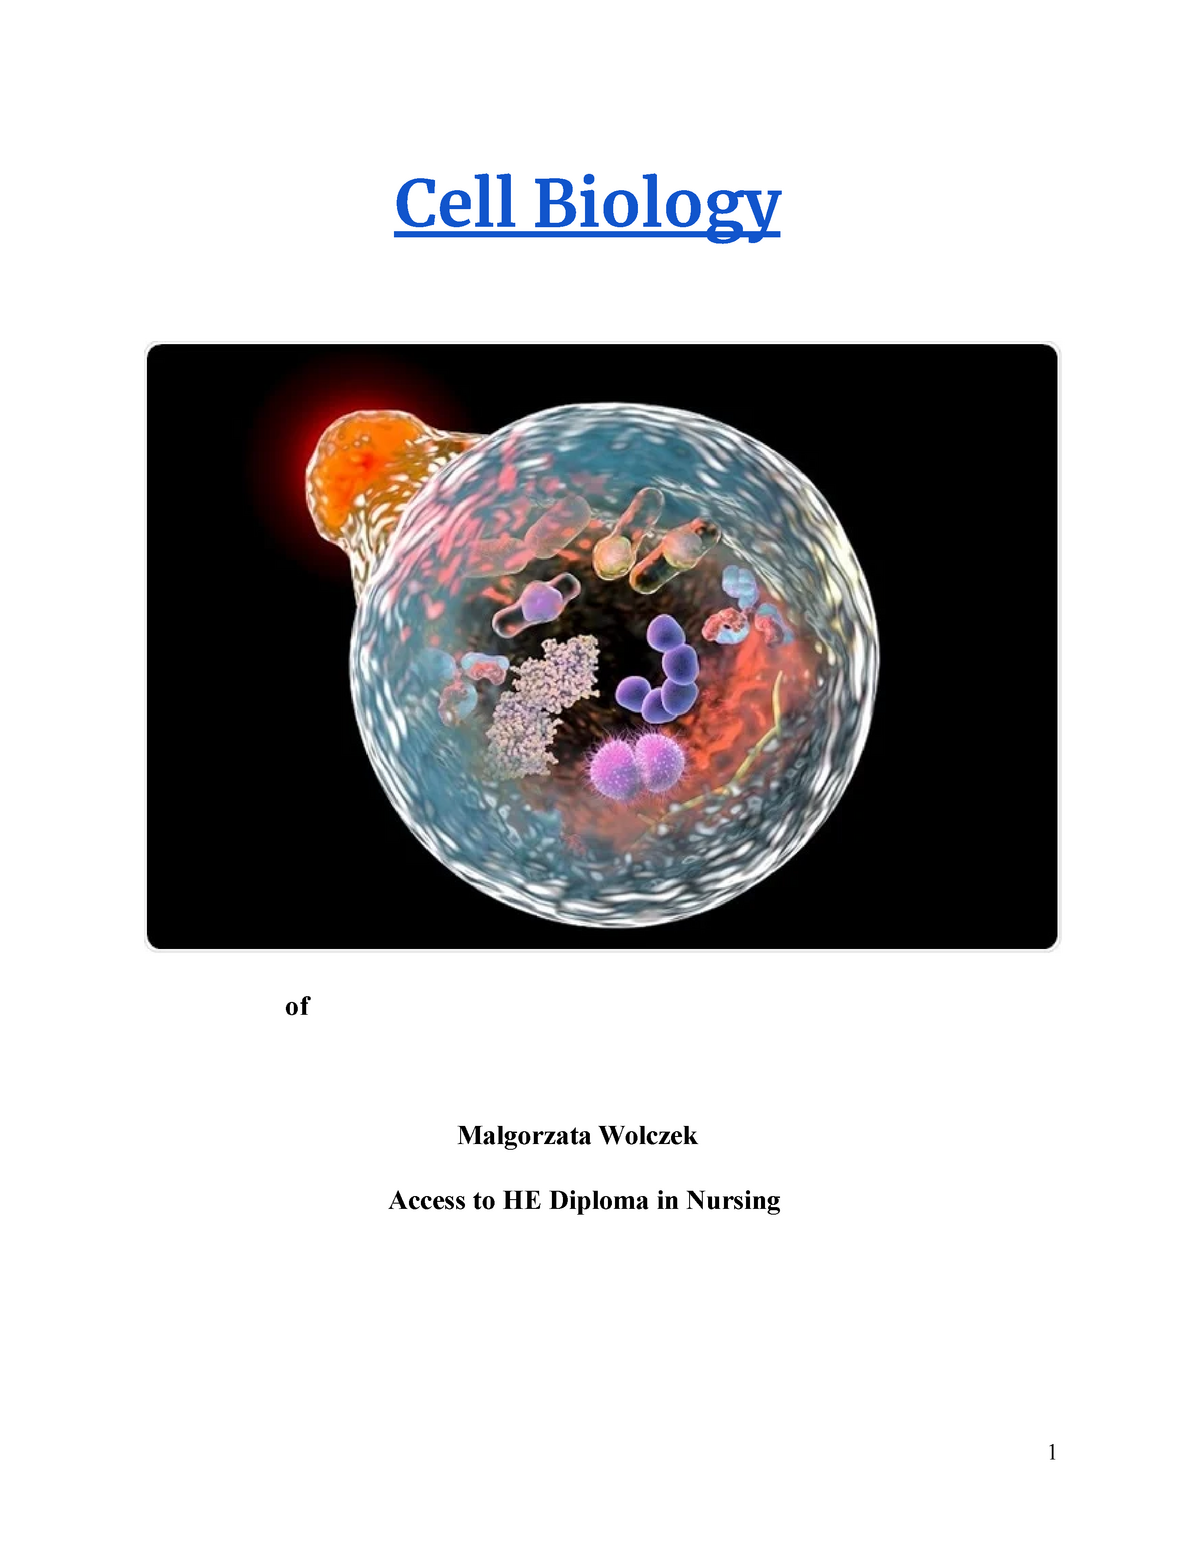 essay questions on cell biology